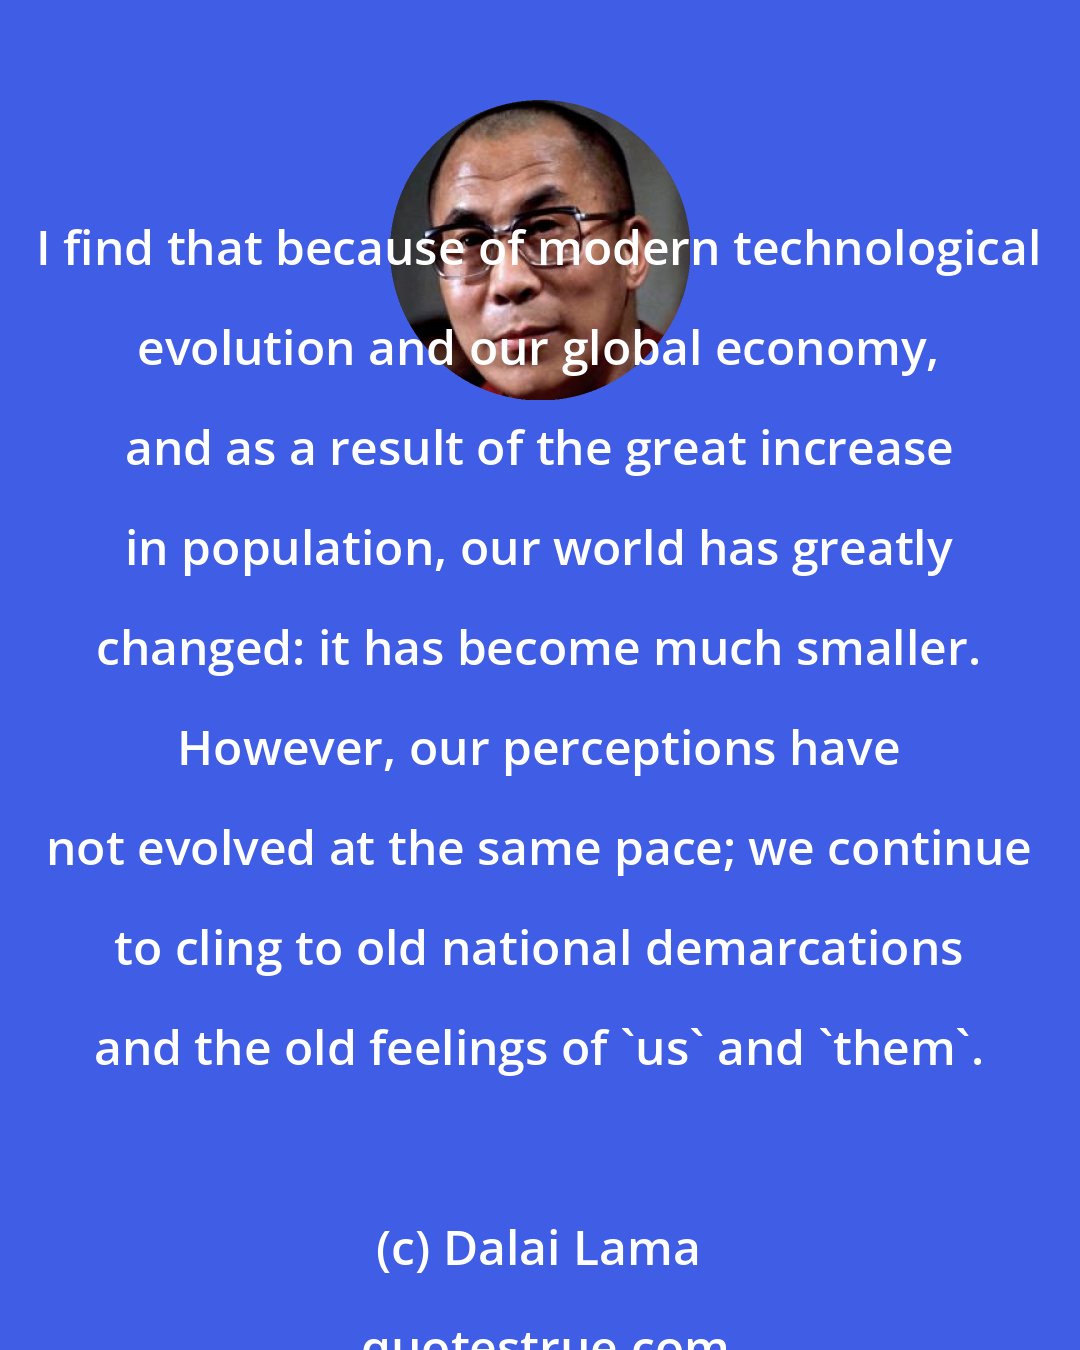 Dalai Lama: I find that because of modern technological evolution and our global economy, and as a result of the great increase in population, our world has greatly changed: it has become much smaller. However, our perceptions have not evolved at the same pace; we continue to cling to old national demarcations and the old feelings of 'us' and 'them'.